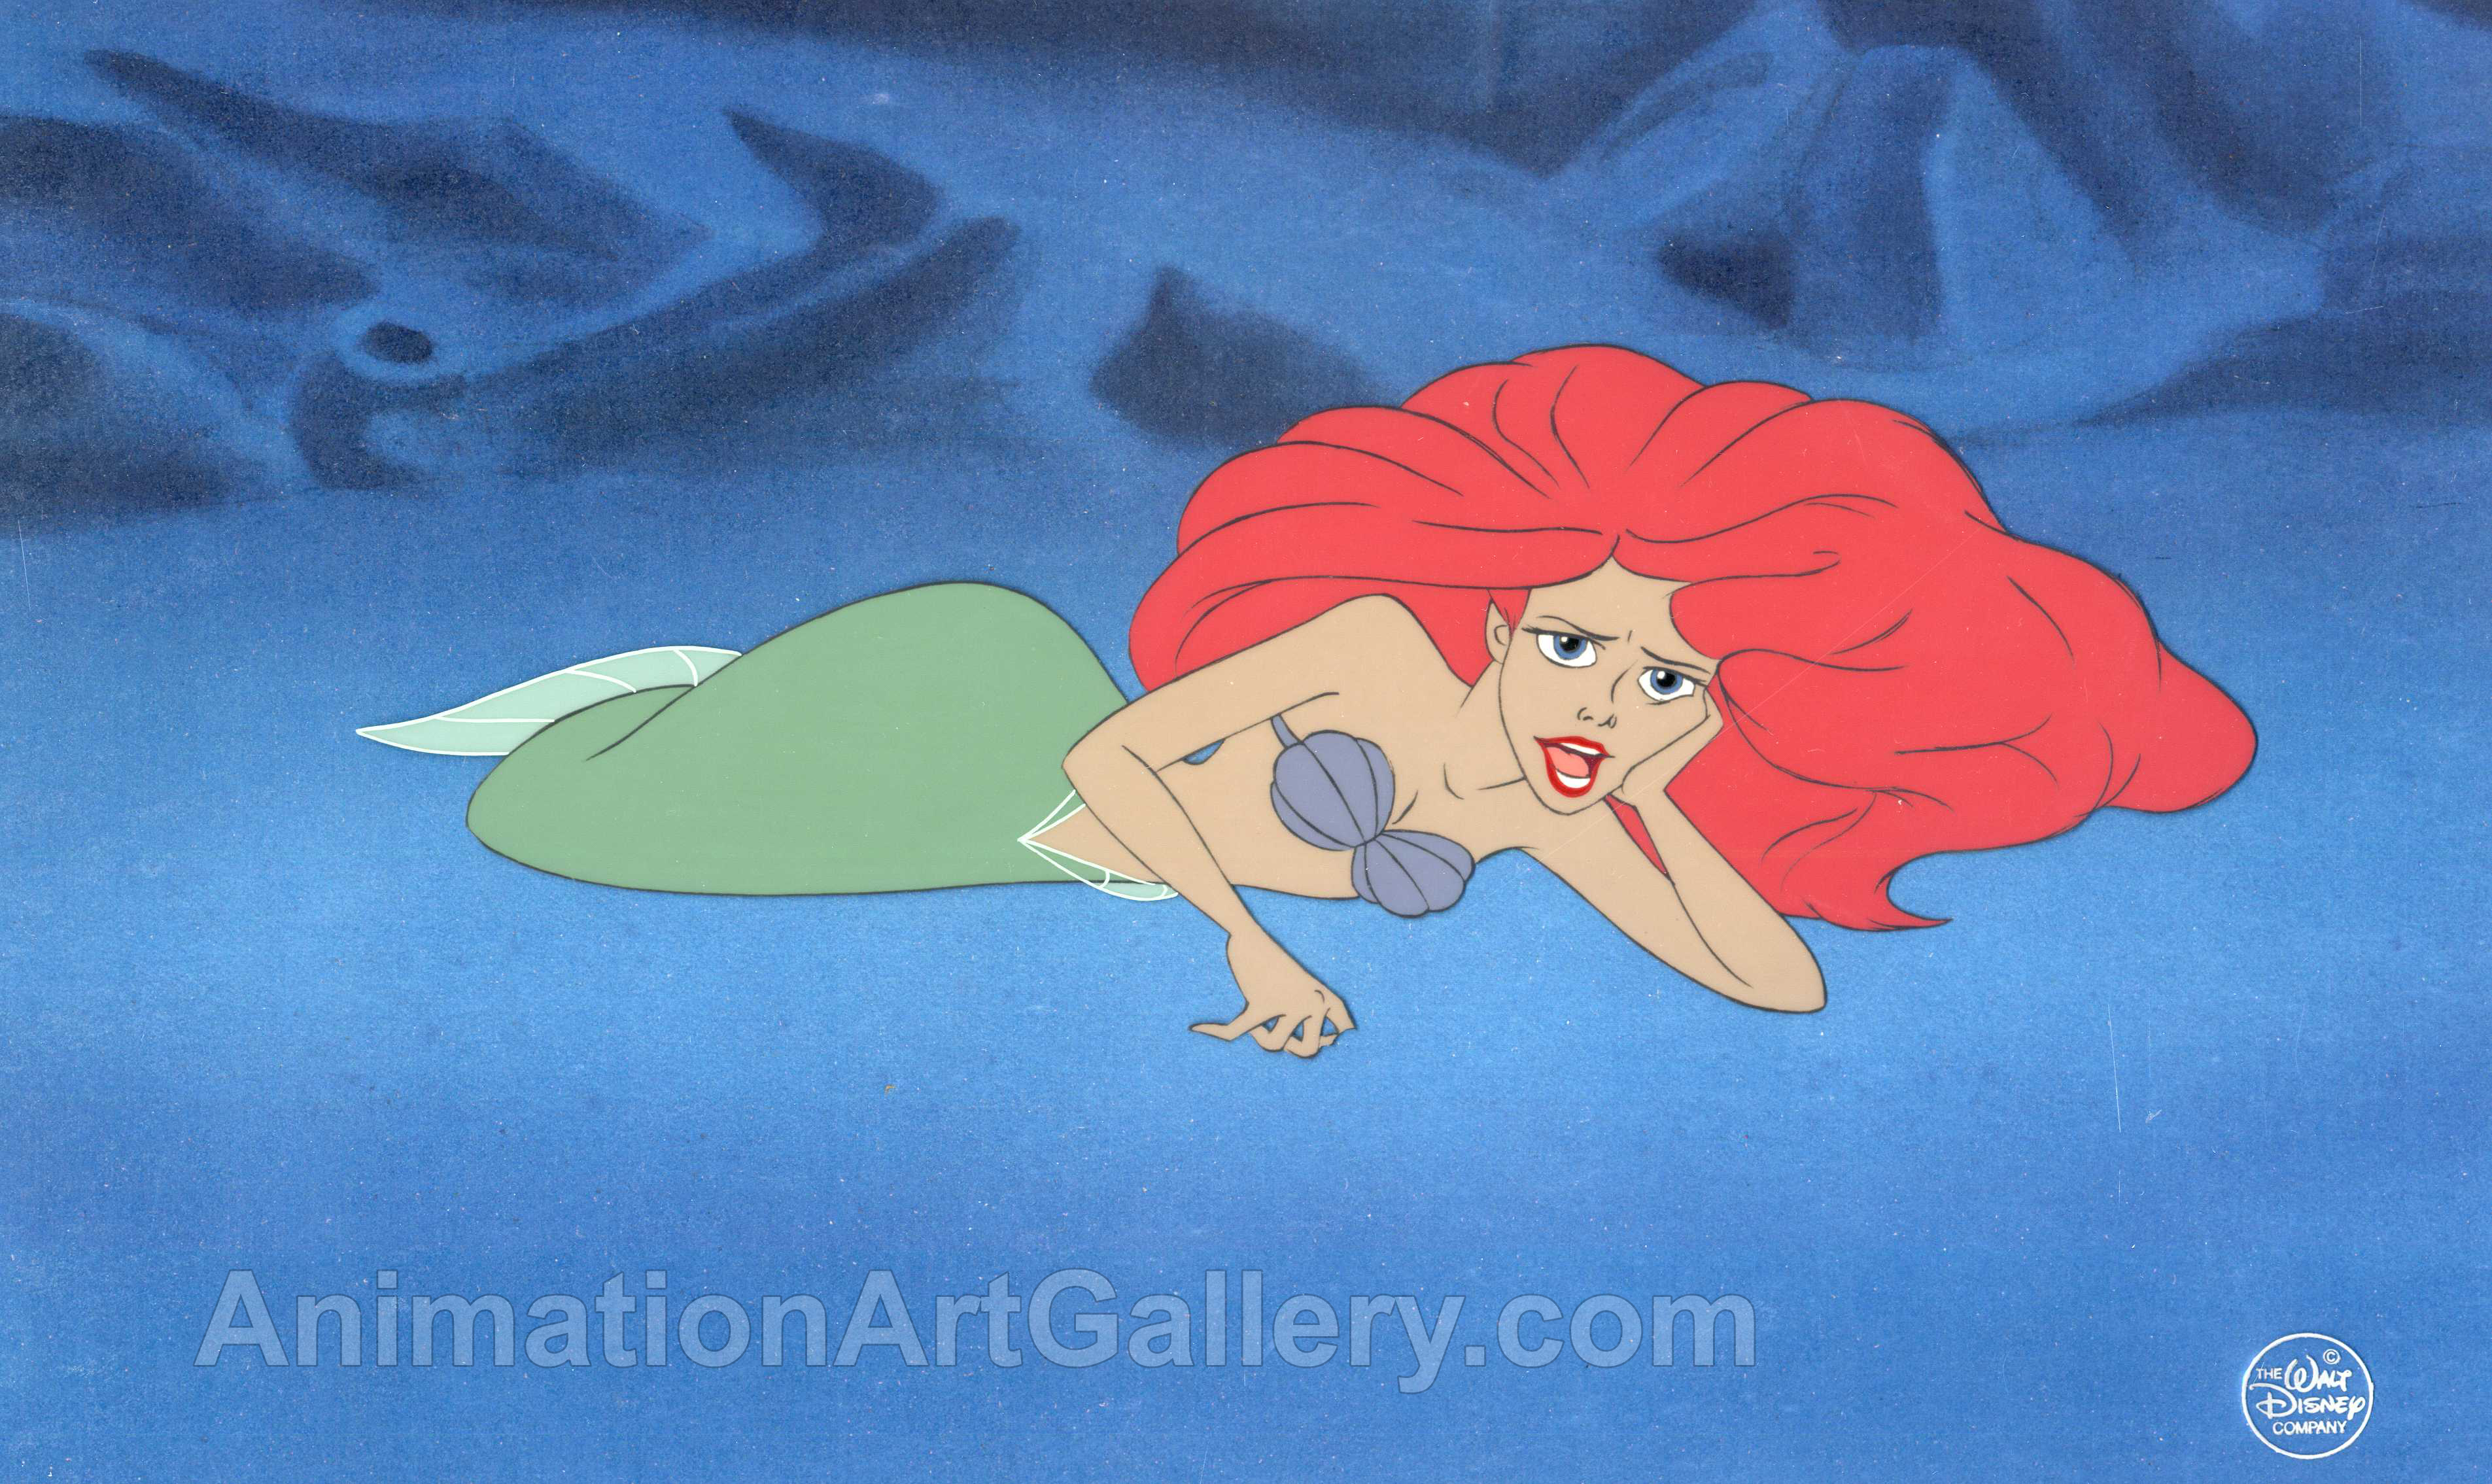 Original Production cel of Ariel from the Little Mermaid